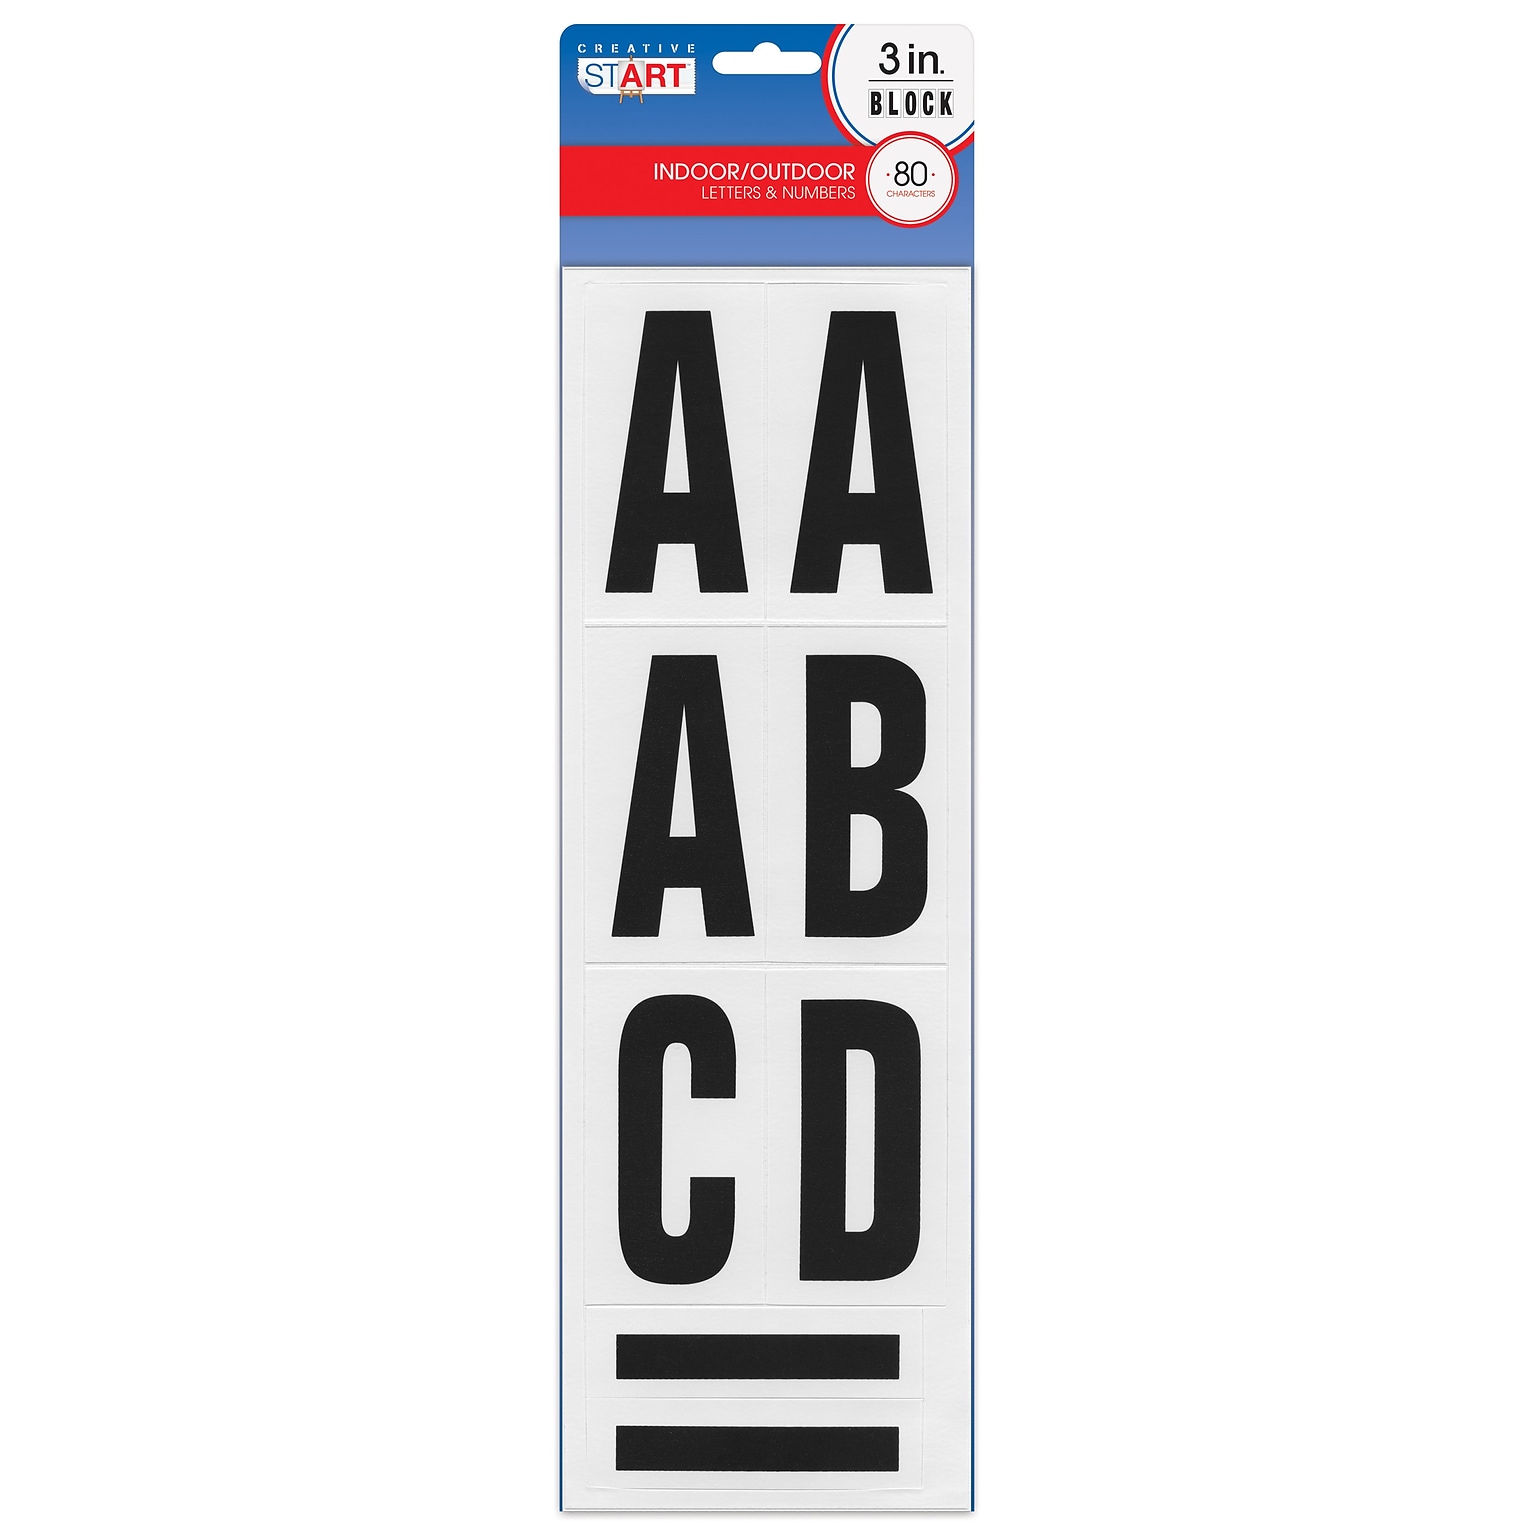 Creative Start Self-Adhesive 3H Letters, Numbers, and Characters, Black, 240 Count, 3 Pack (098132PK3)